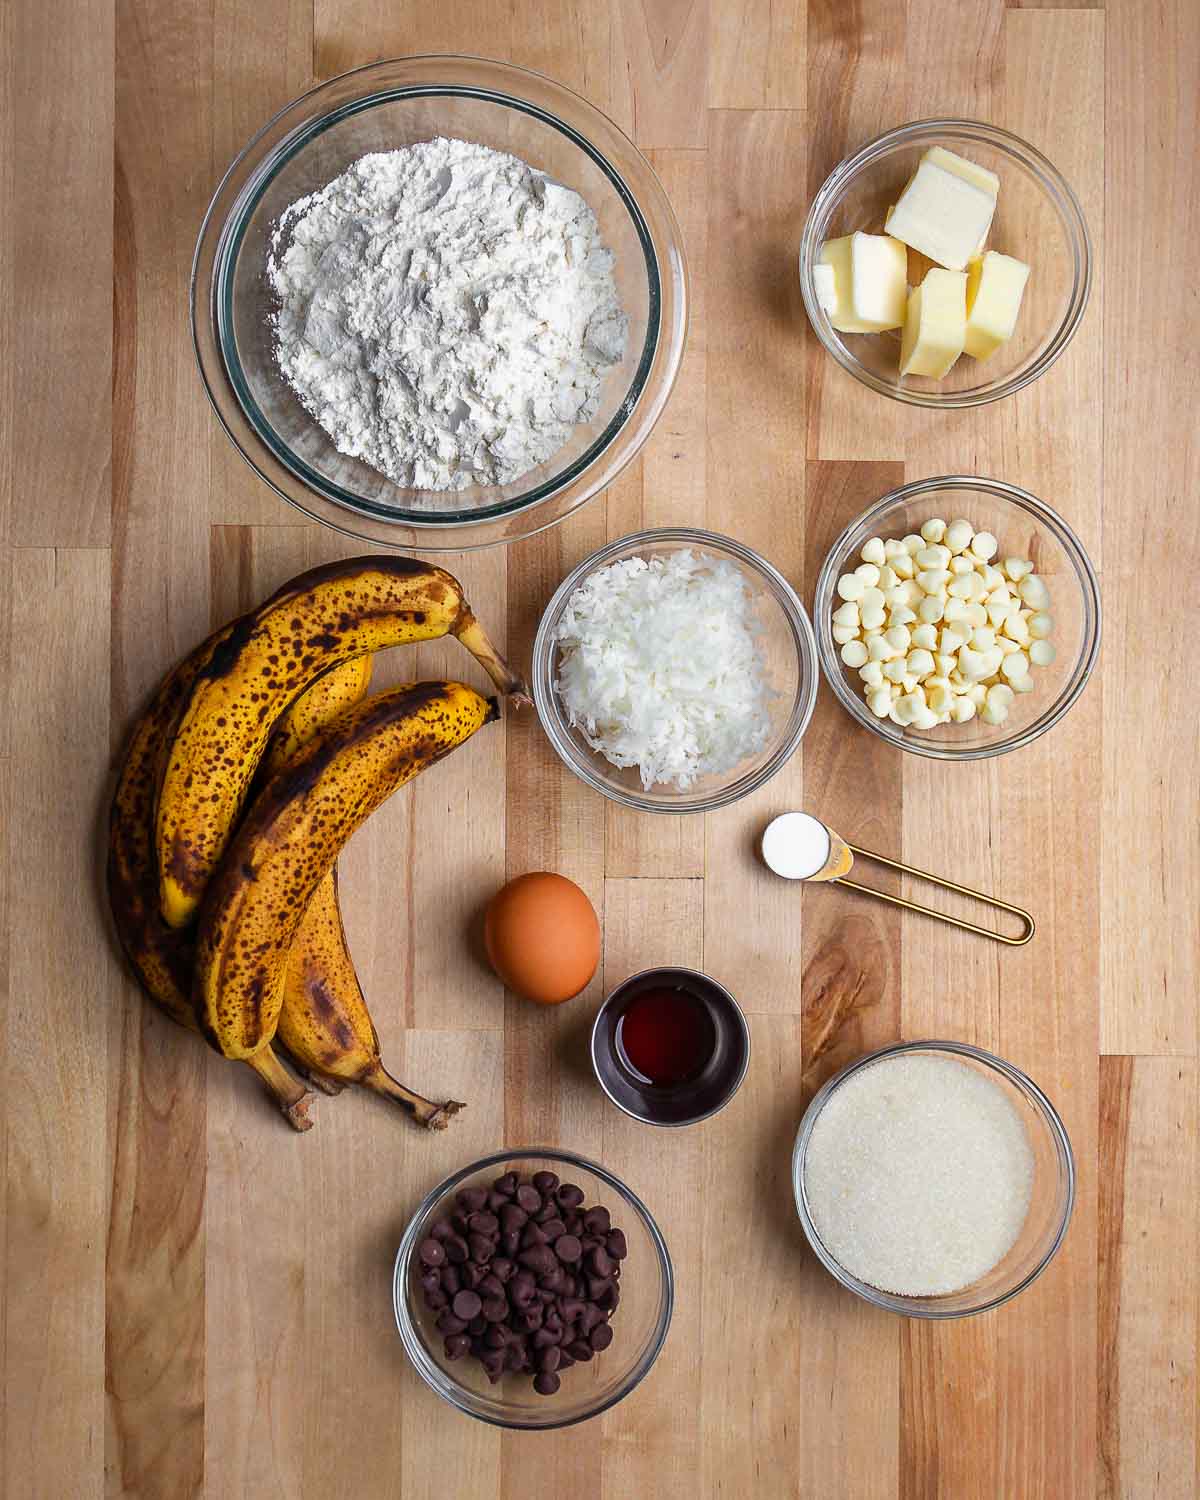 Ingredients shown: flour, butter, bananas, egg, coconut, white chocolate chips, sugar, vanilla, chocolate chops, and sugar.